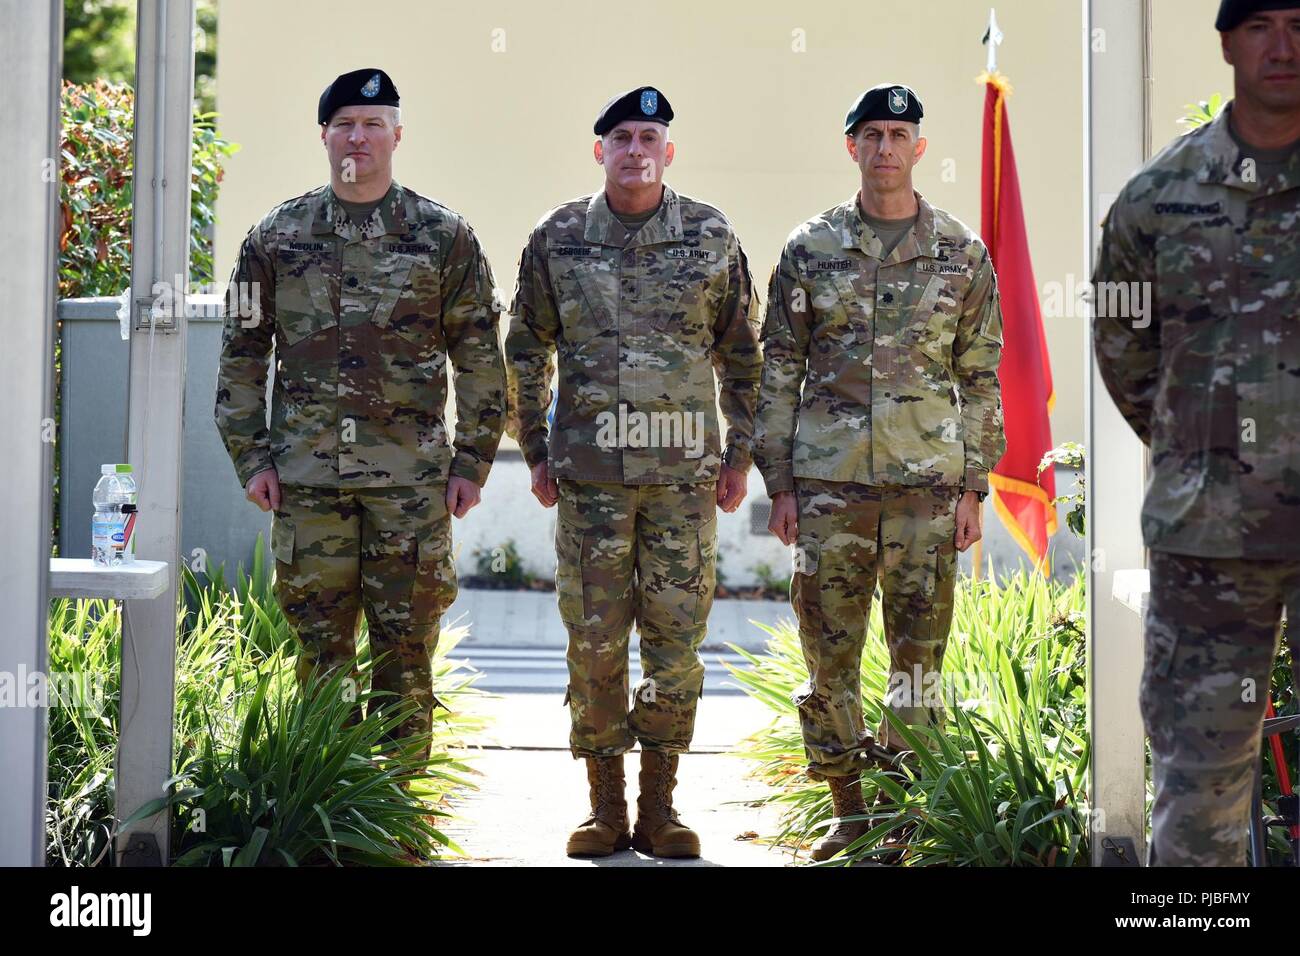 U.S. Army Africa, Brig. Gen. Eugene J. LeBoeuf, the U.S. Army Africa acting commanding general (center), Lt. Col. Marcus S. Hunter, Incoming Battalion Commander, Headquarters and Headquarters Battalion, U.S. Army Africa (left) and Lt. Col. Brett M. Medlin, outgoing Battalion Commander, Headquarters and Headquarters Battalion (right), during the change of command ceremony at Caserma Ederle in Vicenza, Italy, July 12, 2018. Stock Photo